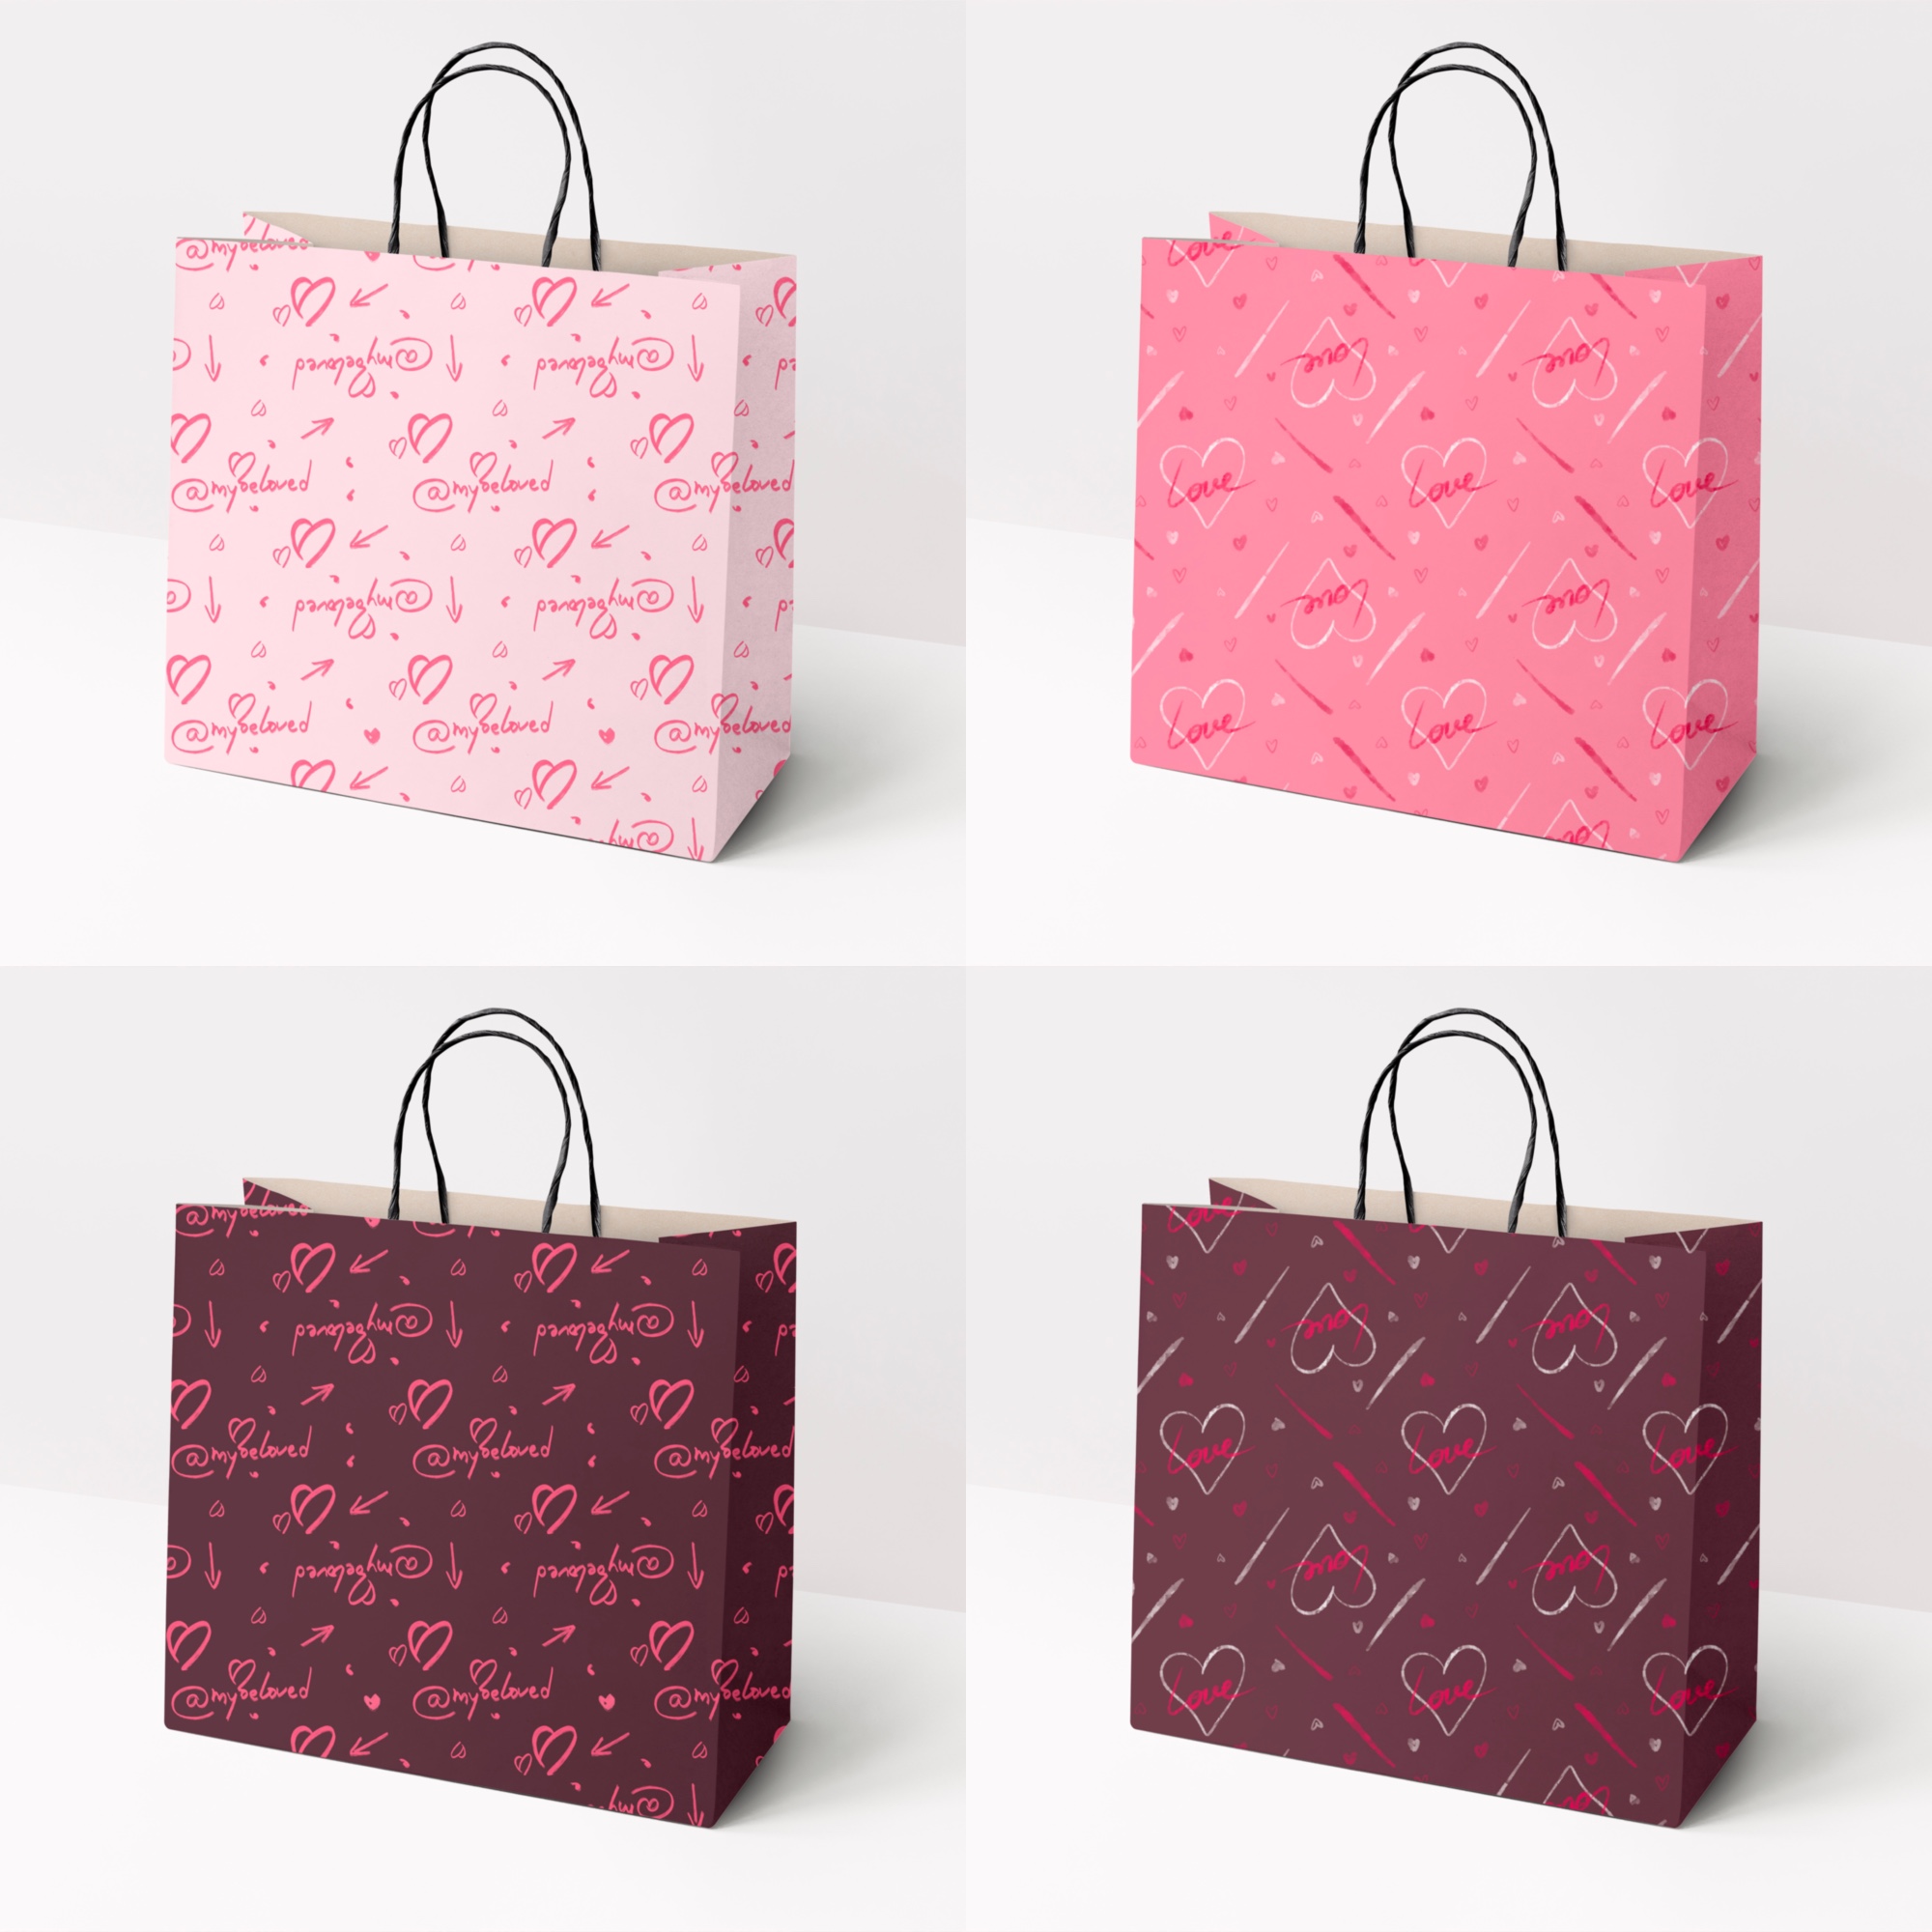 Seamless LOVE Patterns for Valentine’s Day.